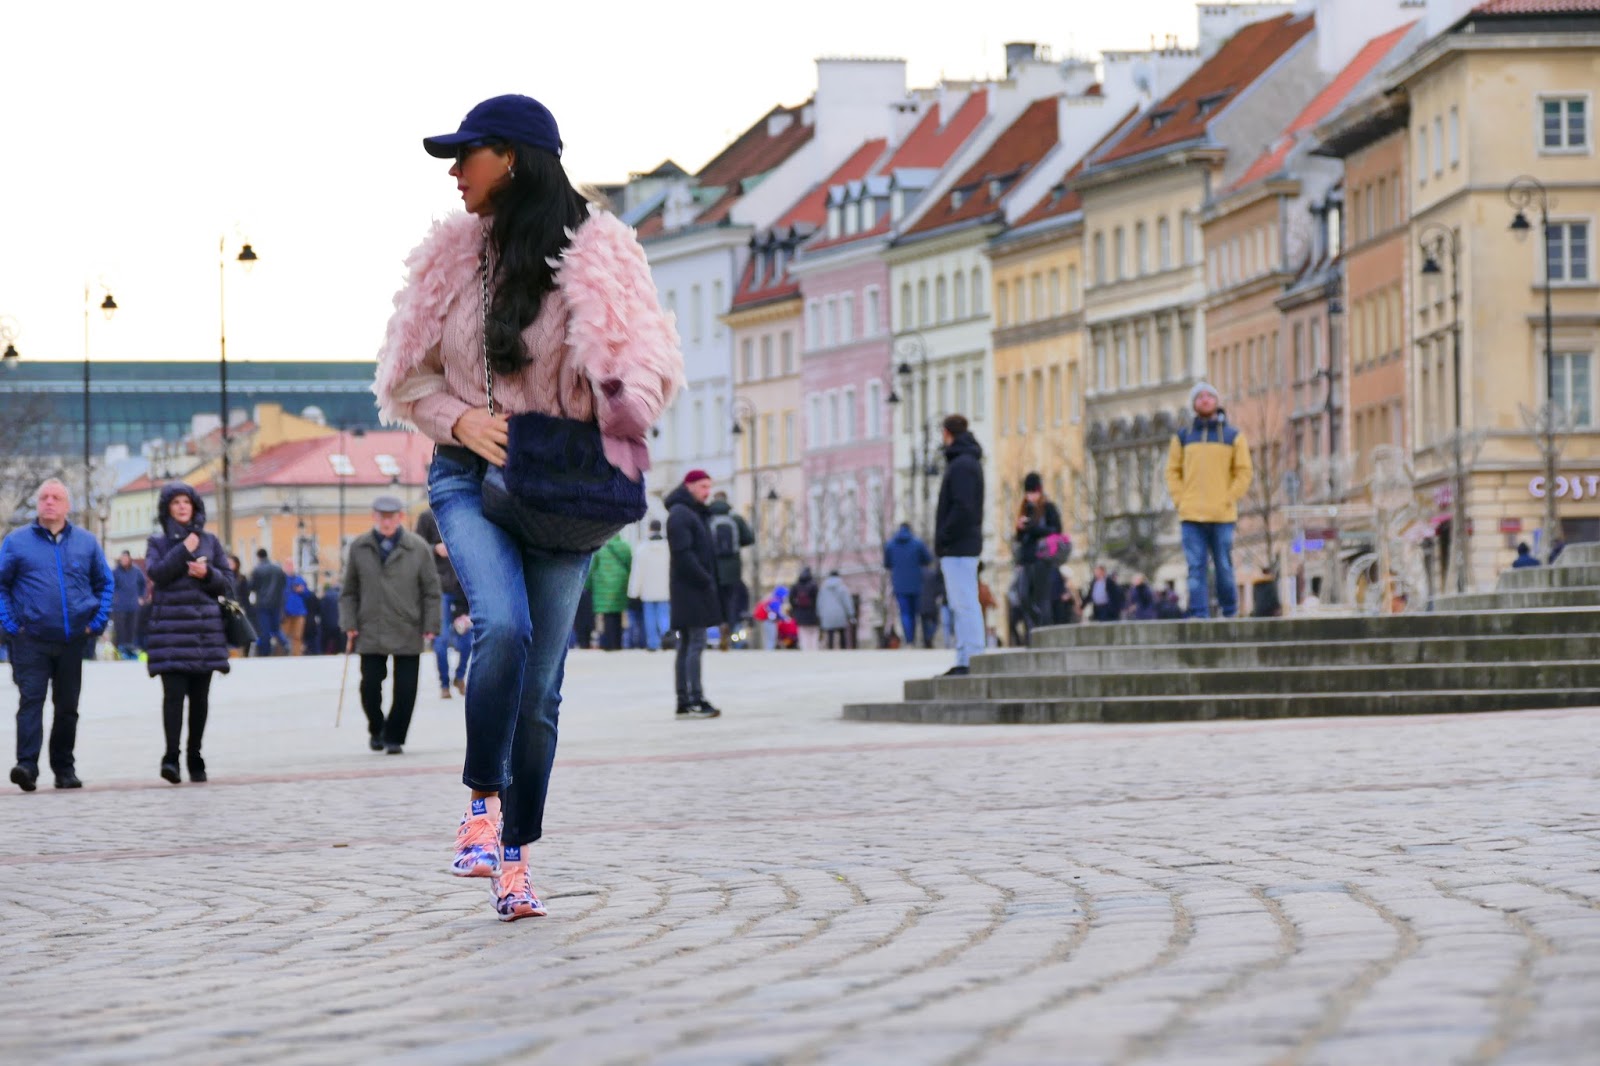 Warsaw’s Old Town: The Finest And Most Picturesque Part Of The City